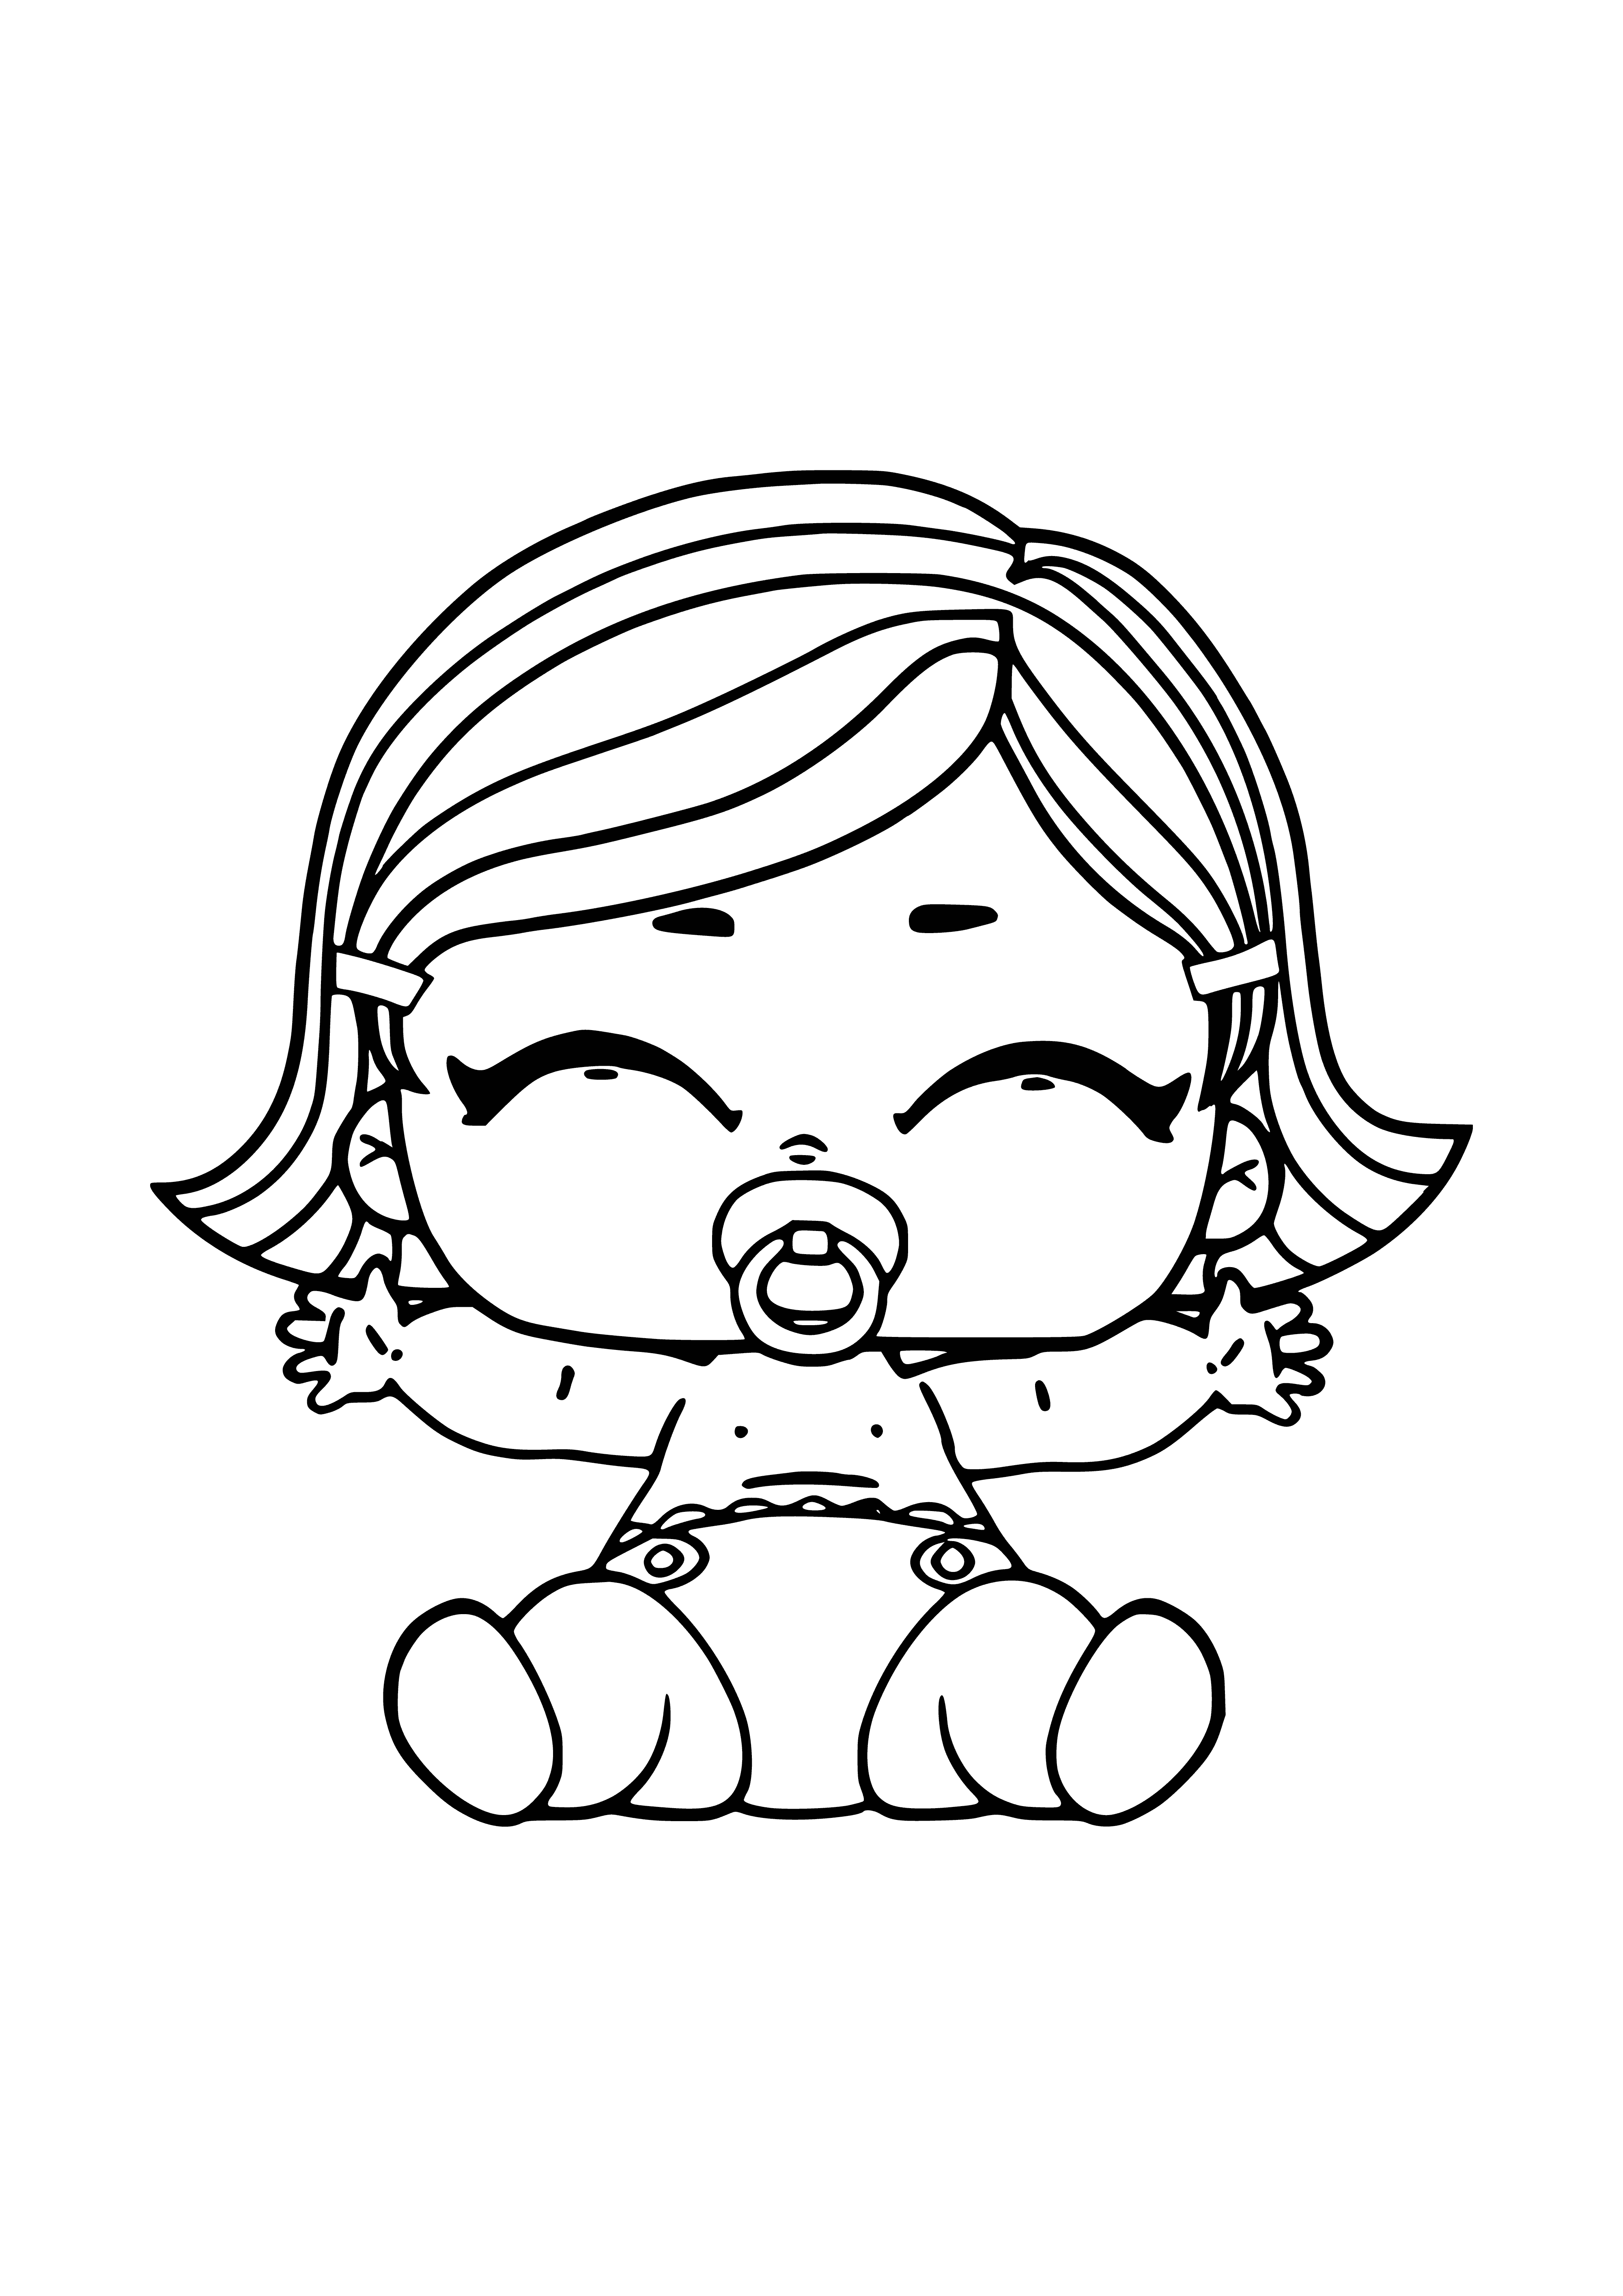 Lol lil dreamy doll coloring page